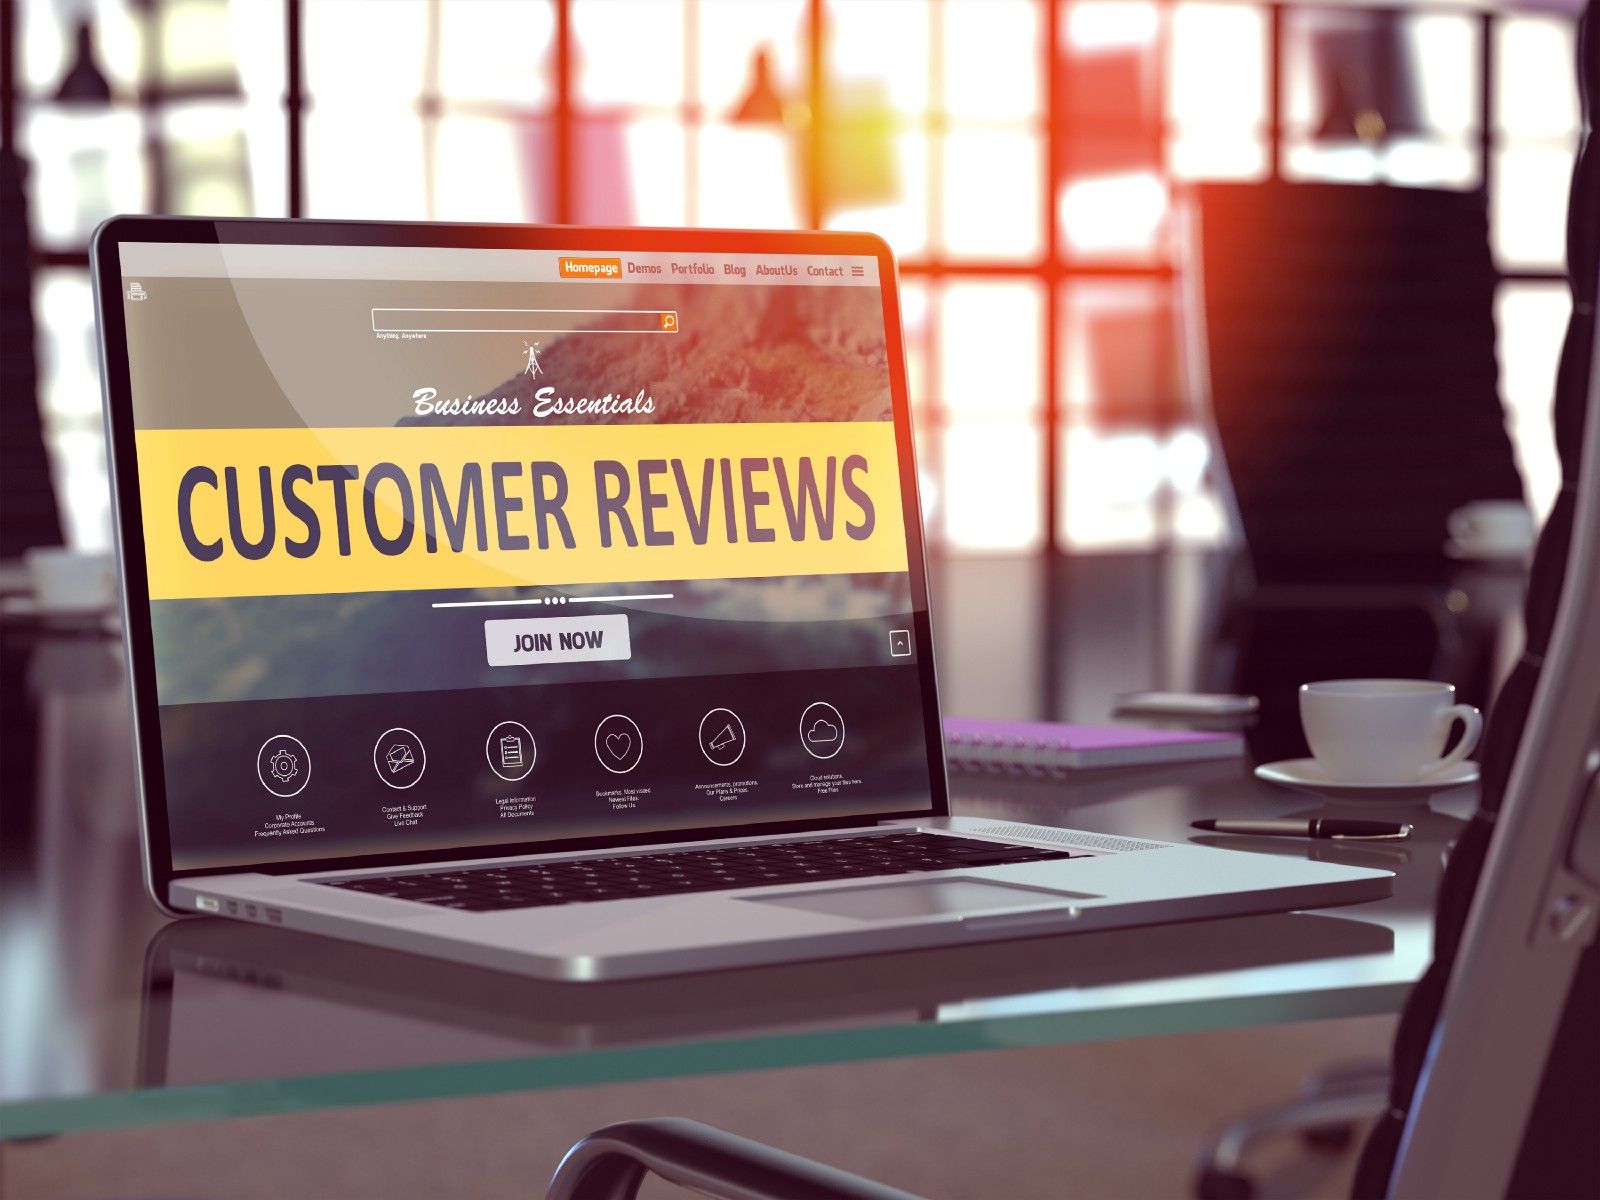 Google Reviews are all too frequently ignored in the local business marketing process.